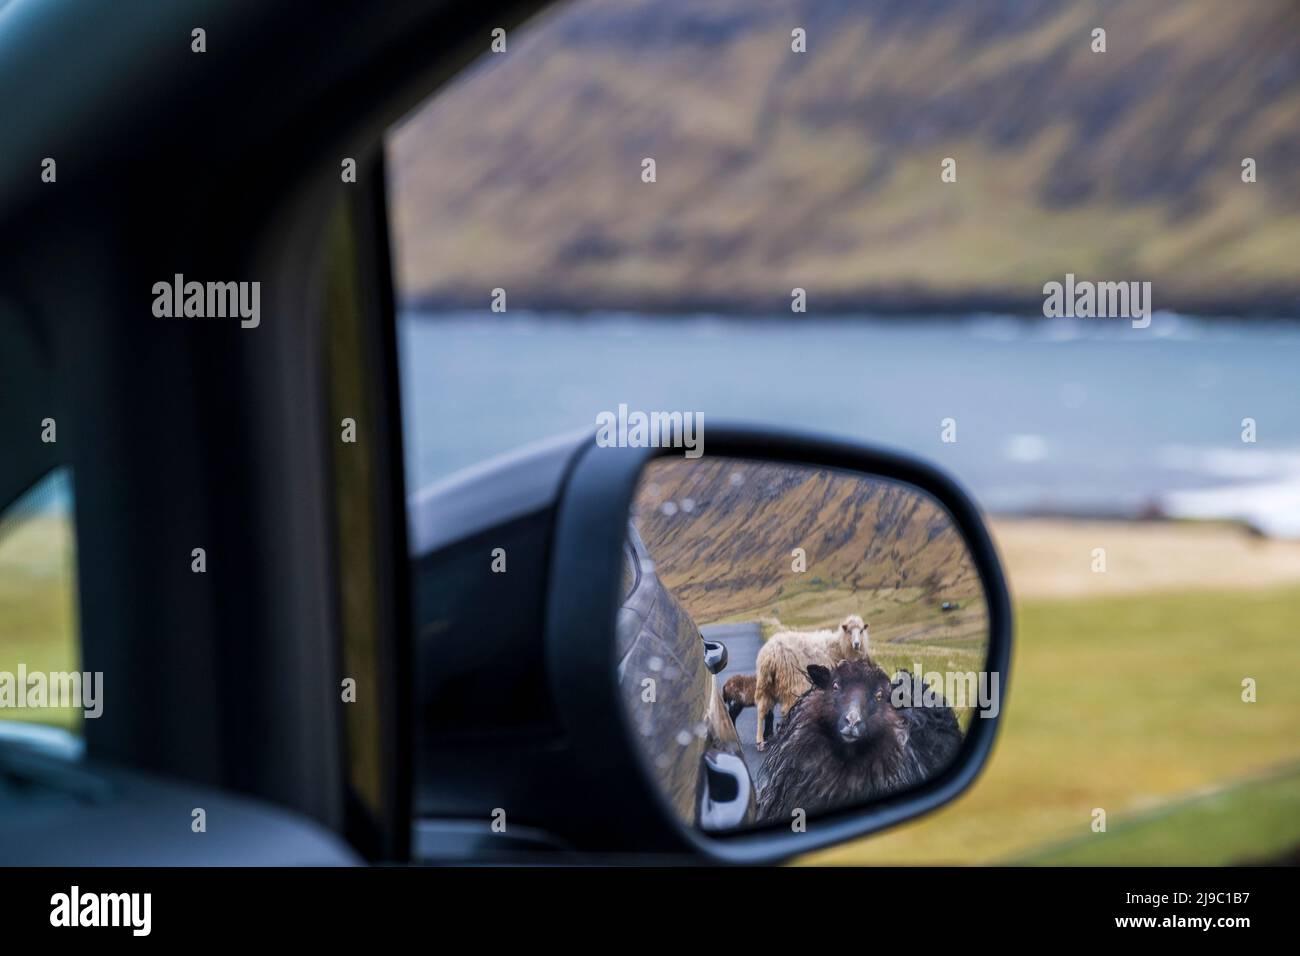 Sheep in the wing mirror of a car. Stock Photo